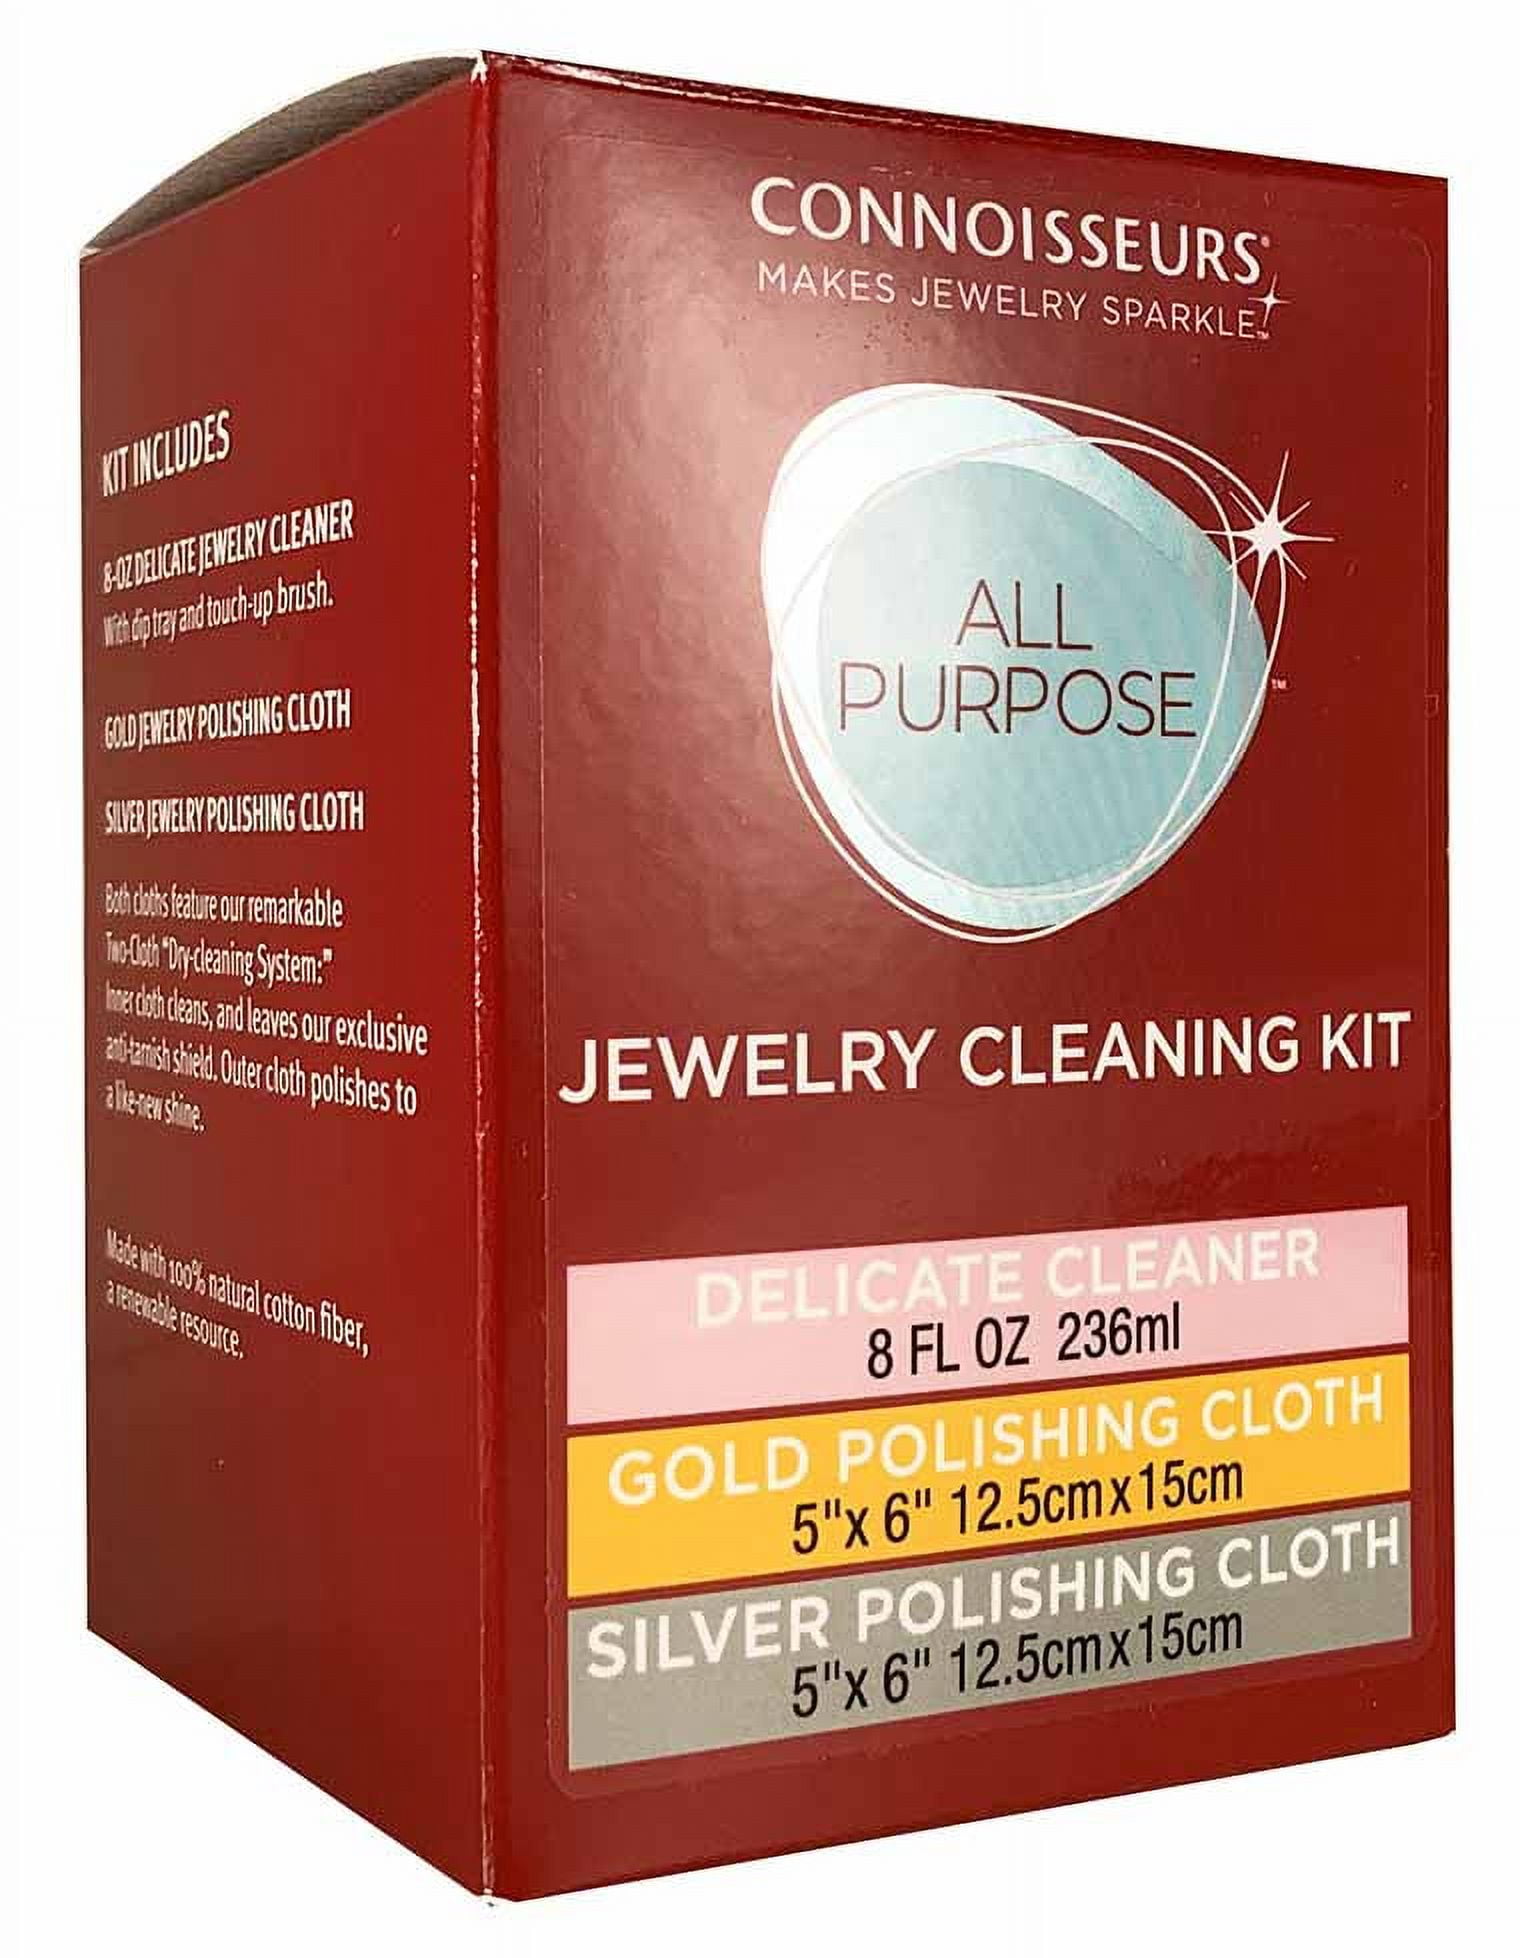 Connoisseurs Delicate Jewelry Cleaner - 8 oz jar